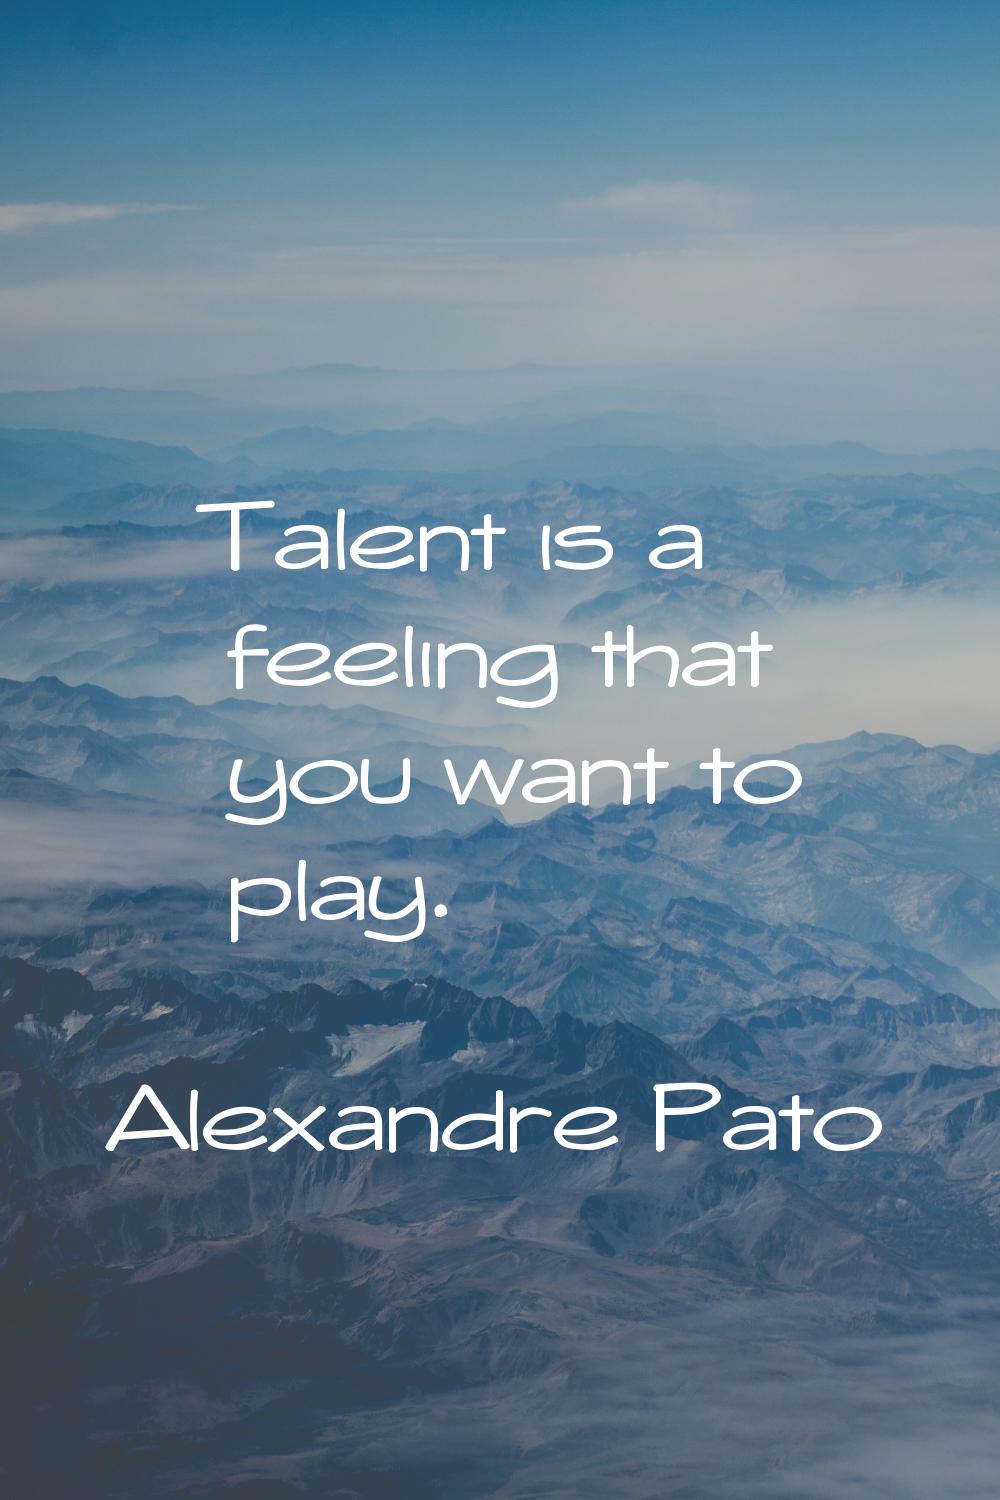 Talent is a feeling that you want to play.